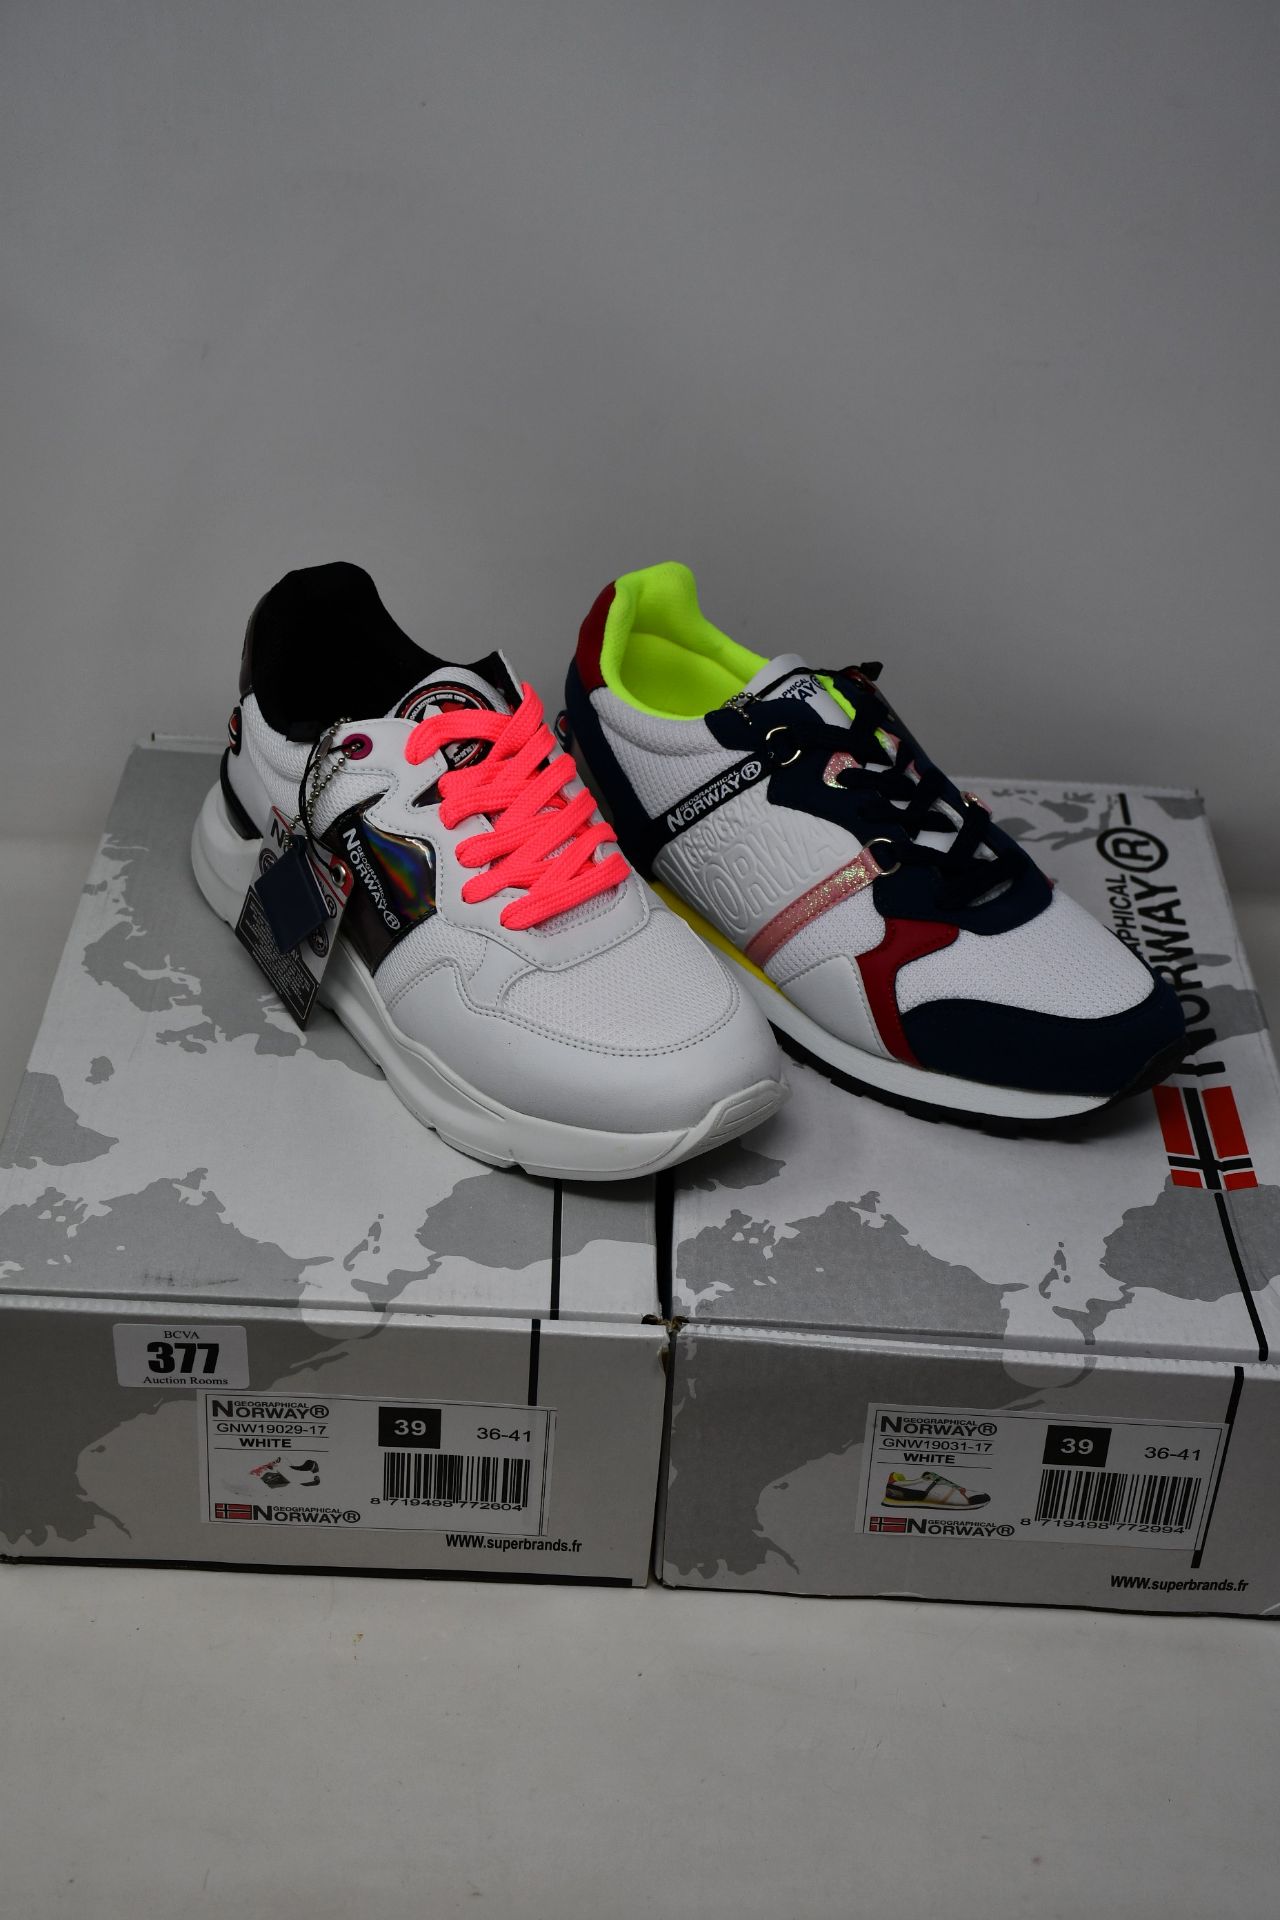 Two pairs of as new Geographical Norway sneakers (EU 39).